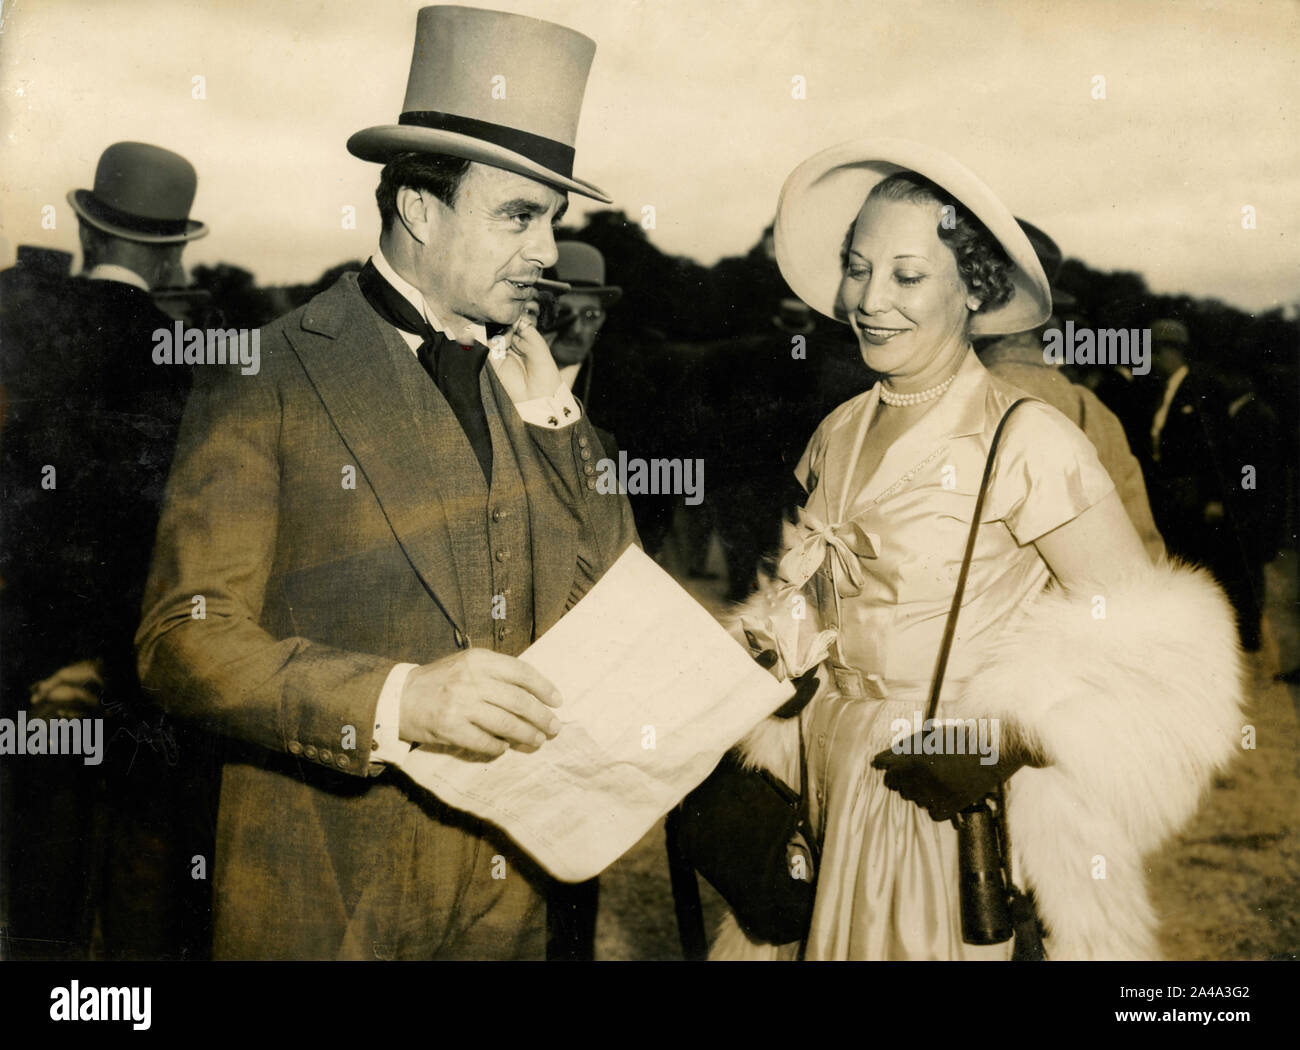 Prince Ali Khan and Suzanne Volterra at the horse race, UK 1950s Stock Photo